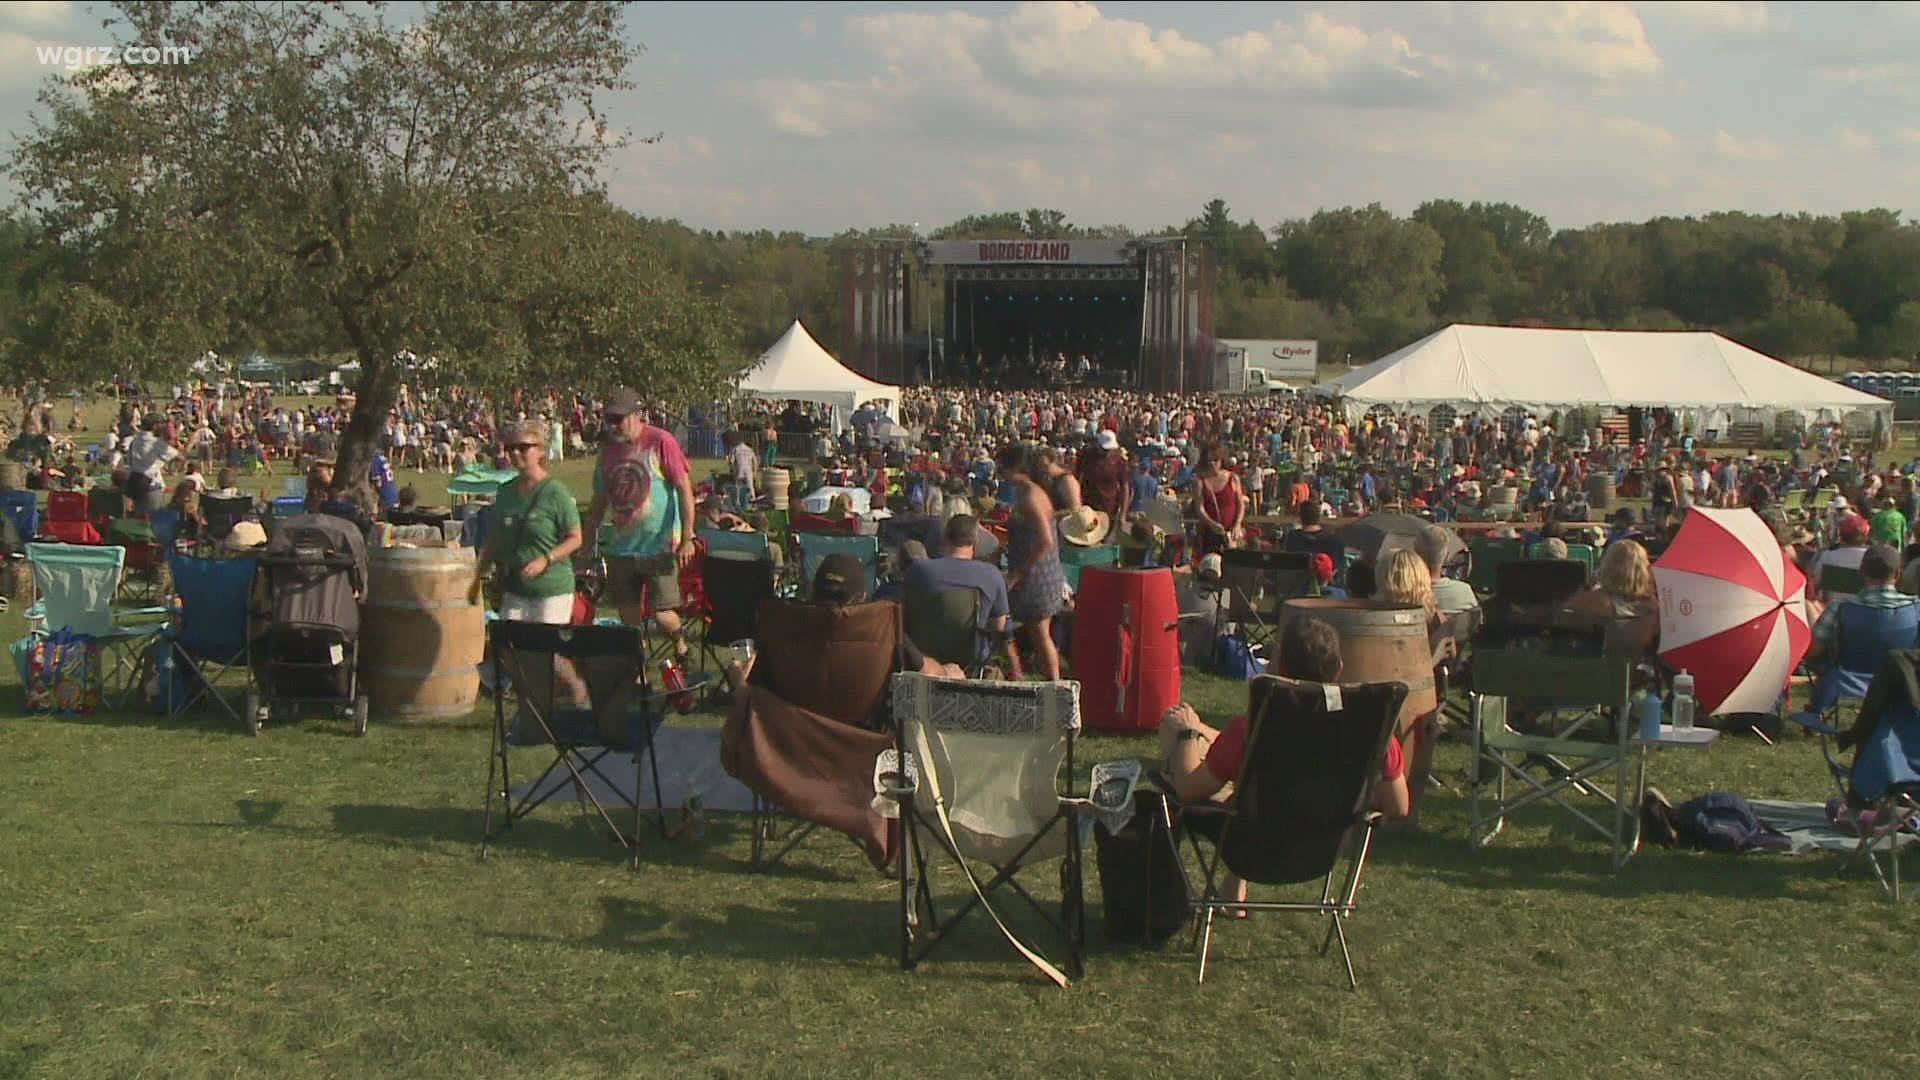 Borderland music festival is back this weekend in East Aurora